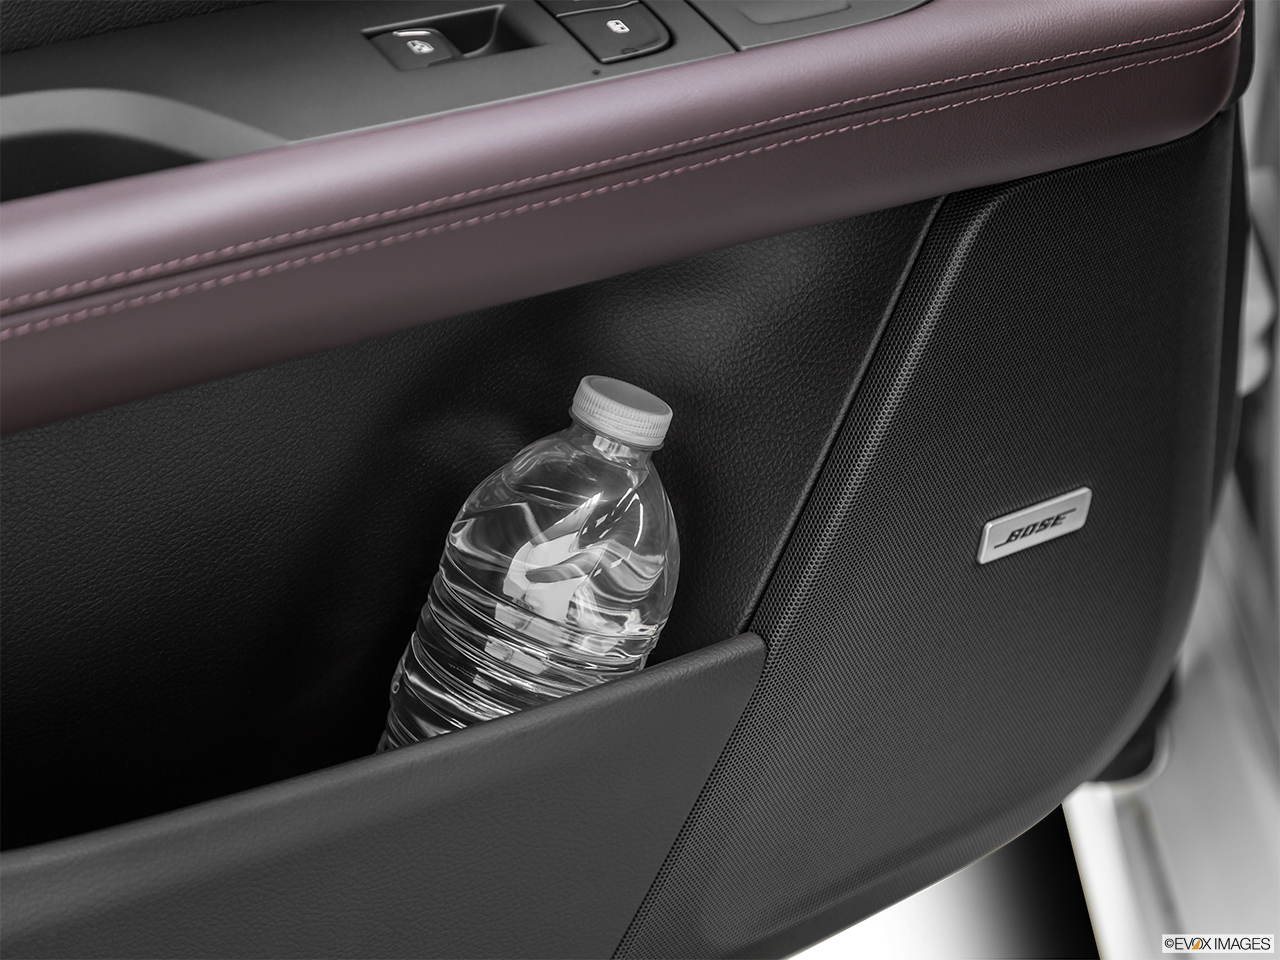 2019 Cadillac CT6-V Base Second row side cup holder with coffee prop, or second row door cup holder with water bottle. 